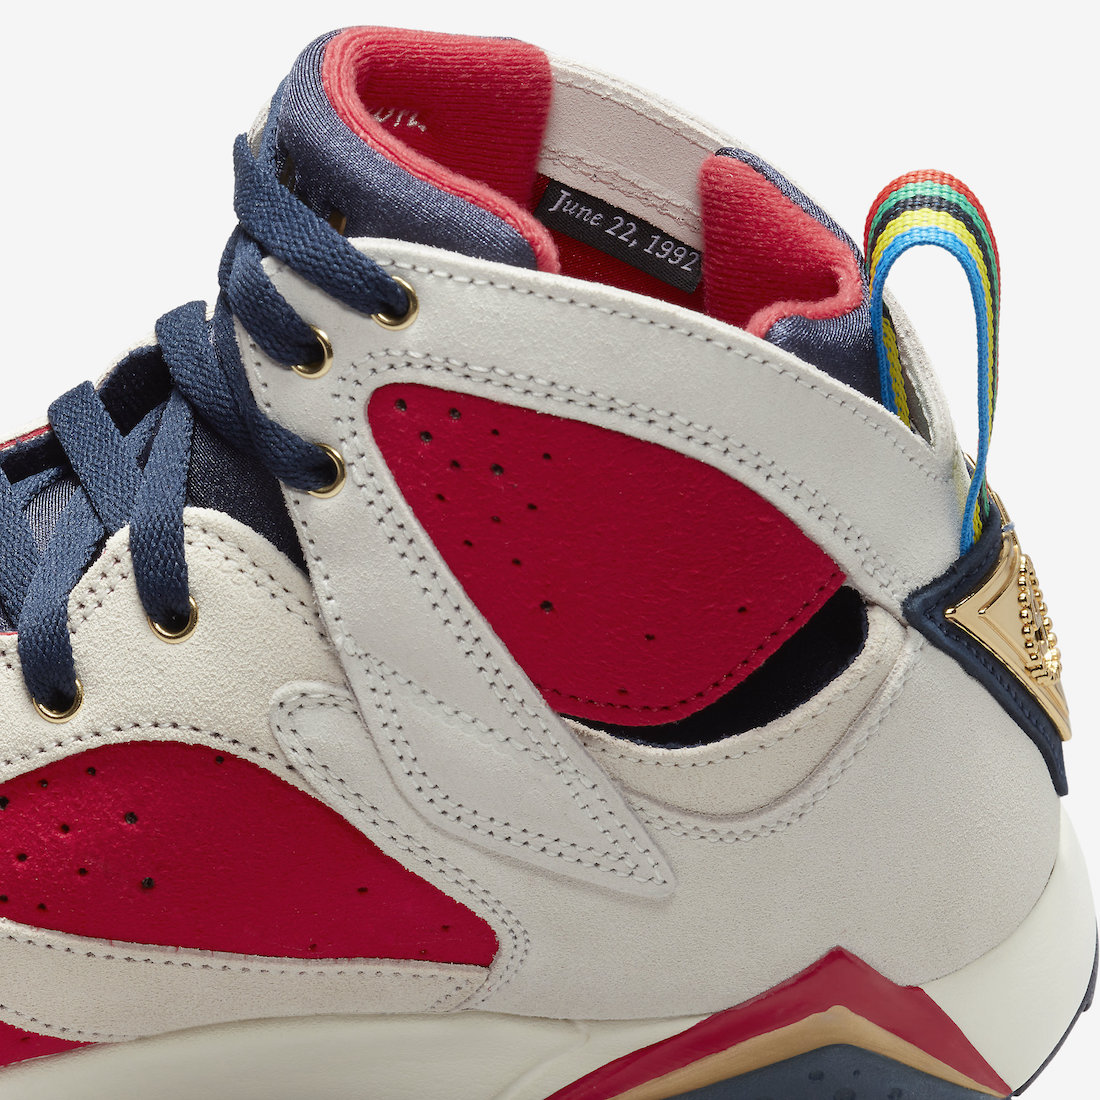 Trophy Room x Air Jordan 7 DM1195  IetpShops - Craft collection will  expand beyond the Air Jordan 2 and Air Jordan 4 in 2023 - 474 Release Date  + Where to Buy